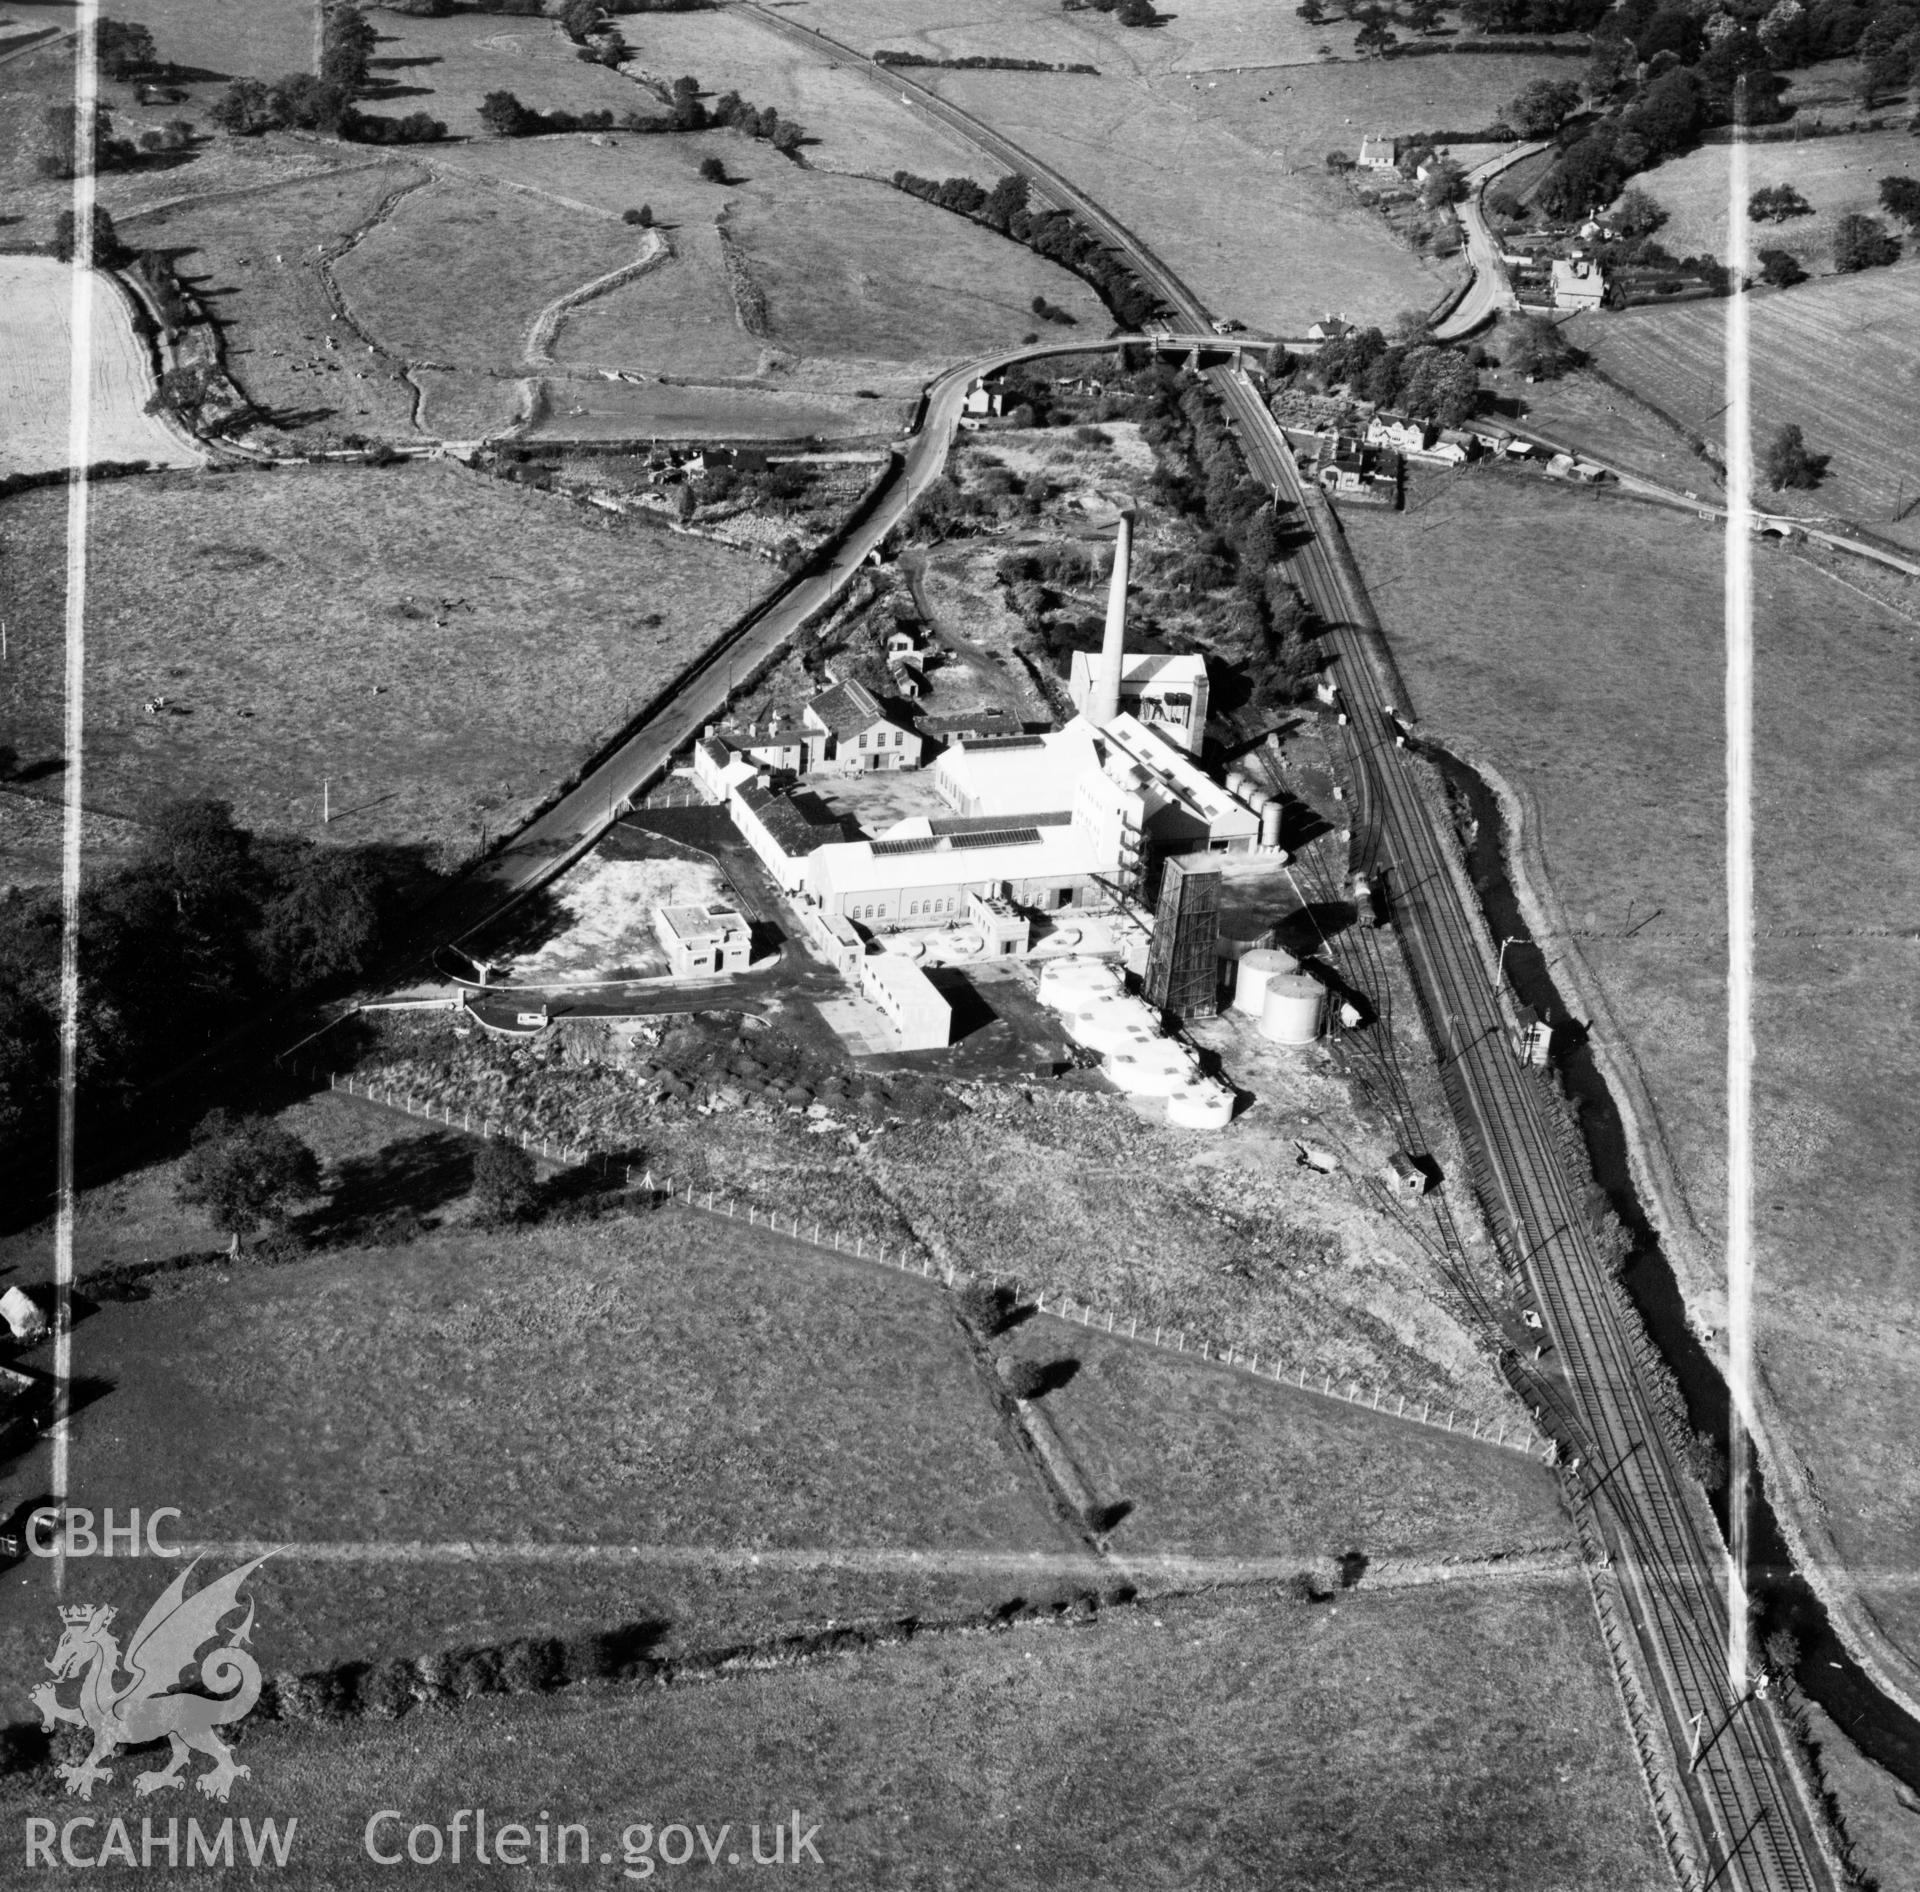 View of the Synthite Ltd. Works near Mold. Oblique aerial photograph, 5?" cut roll film.